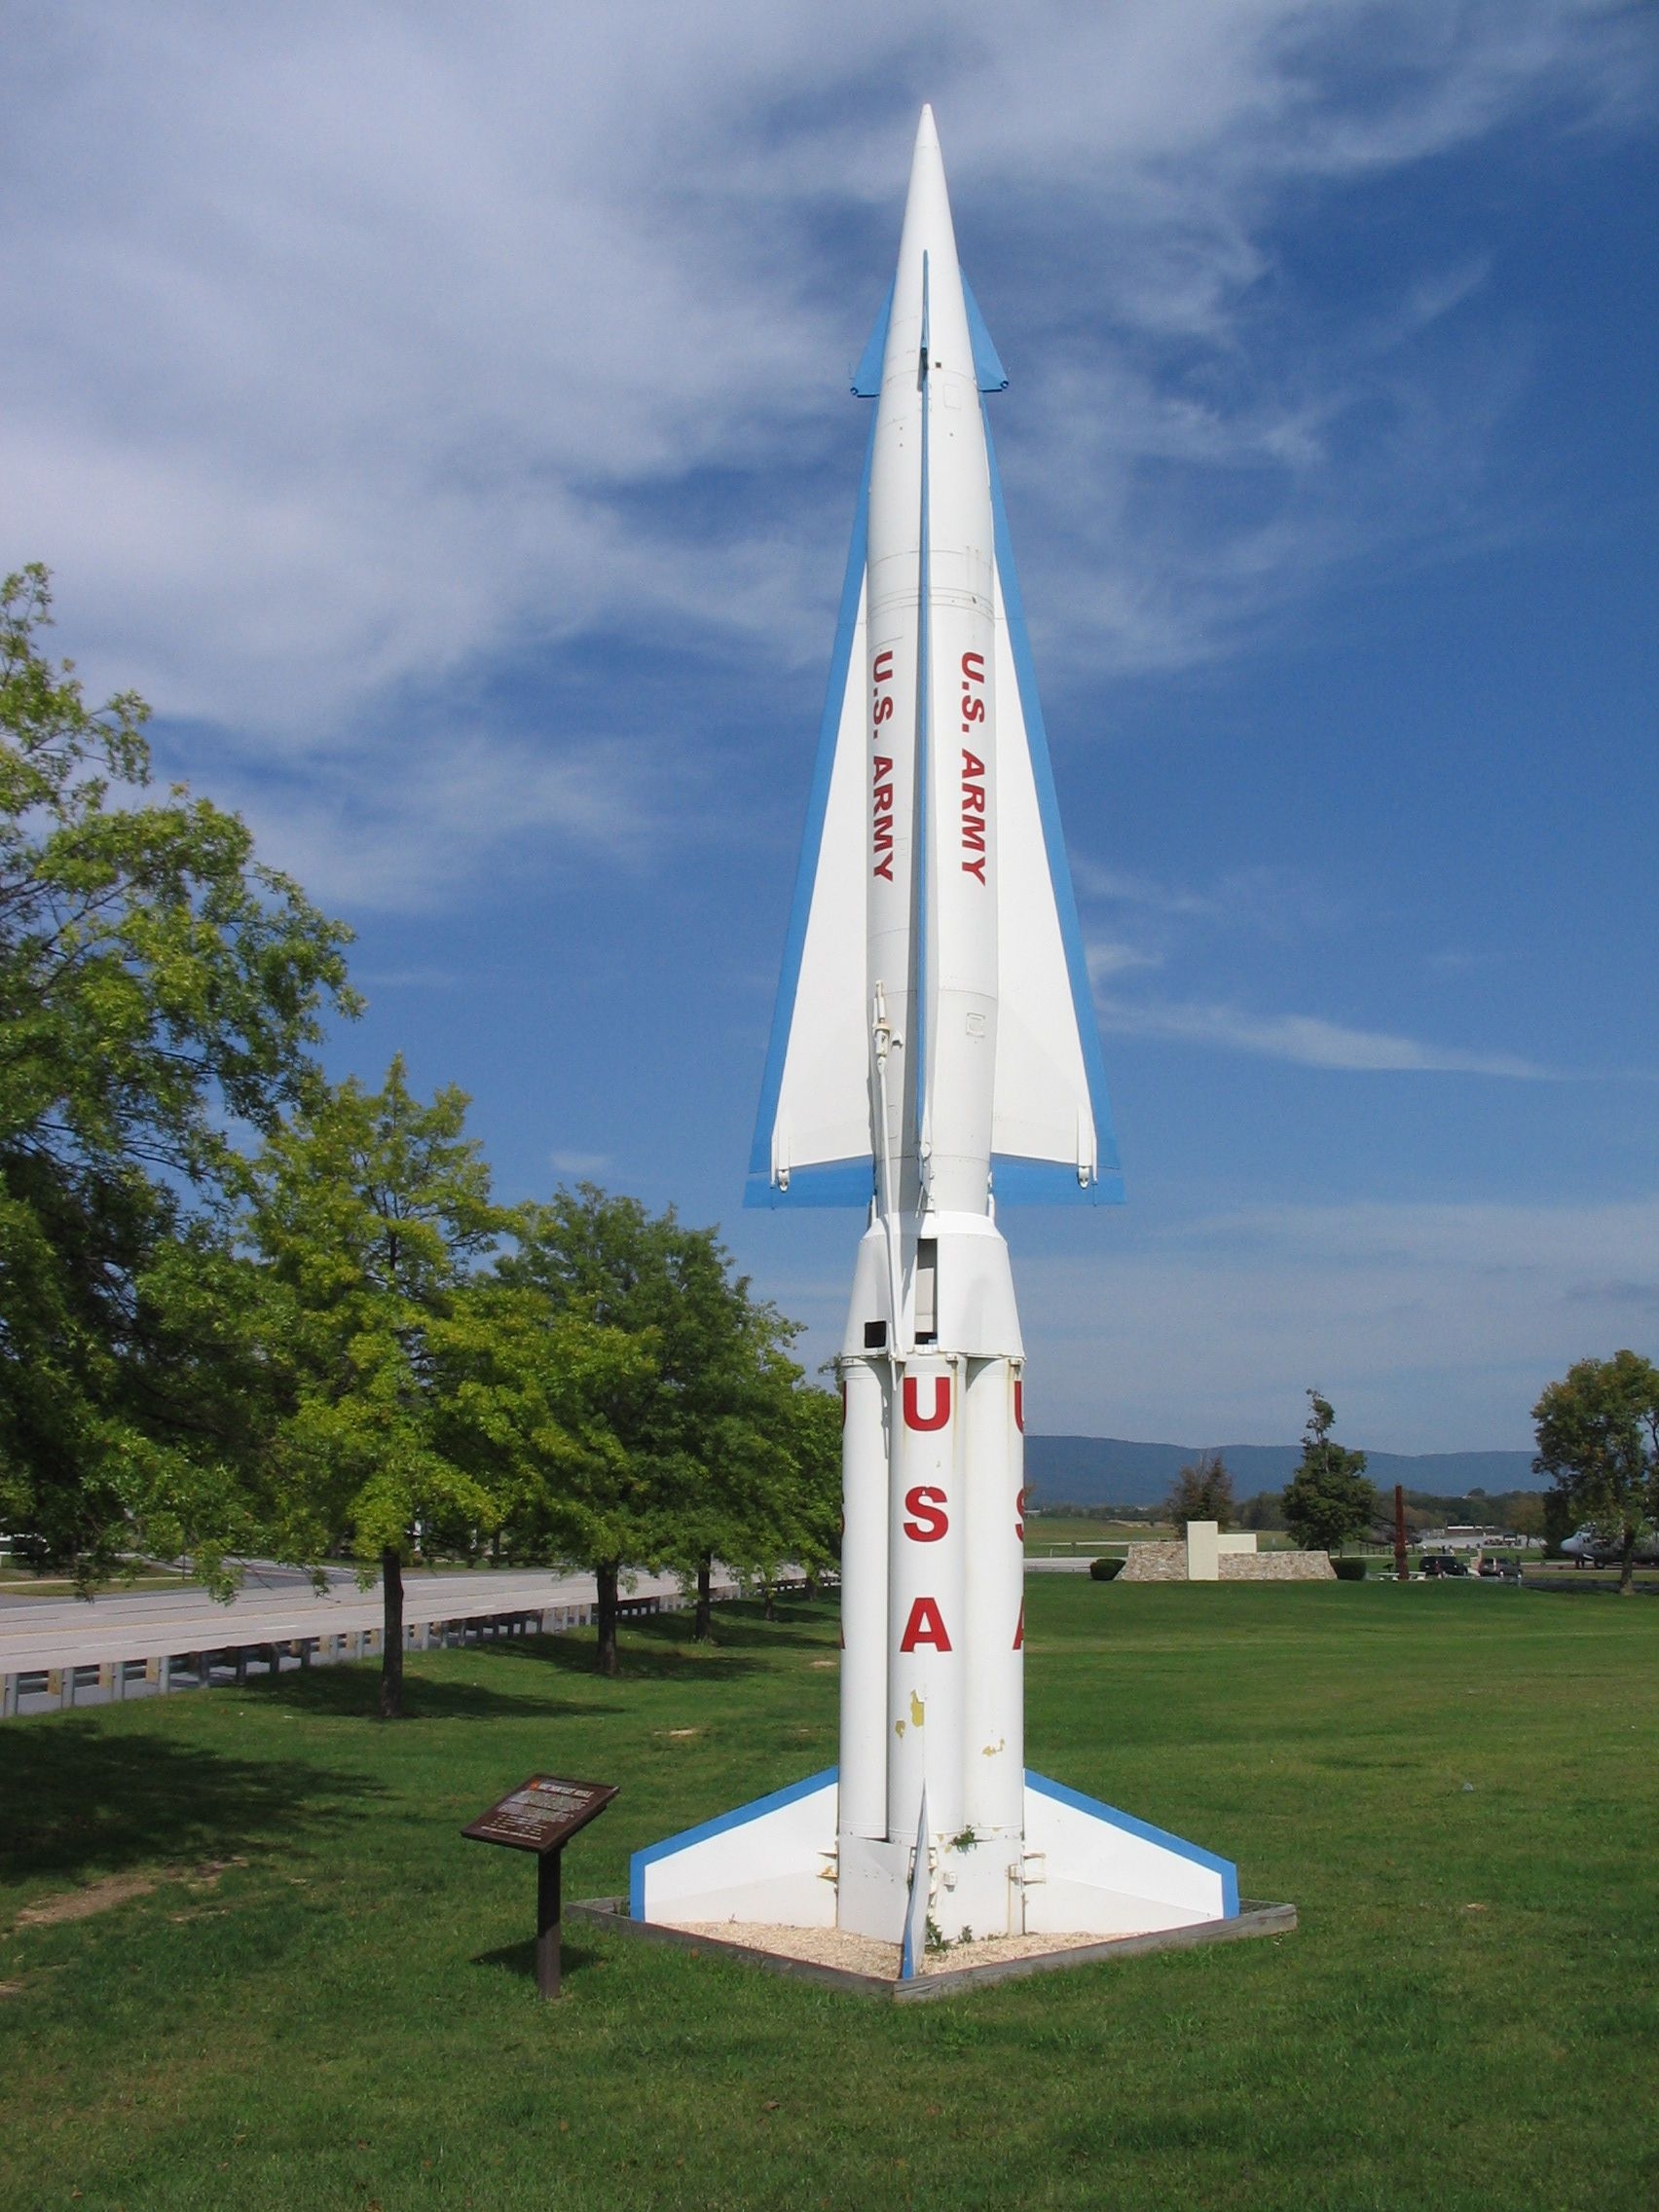 This representation is of a true Nike Hercules missile. Although the missiles are not active anymore, they represent an important piece of Cold War history.